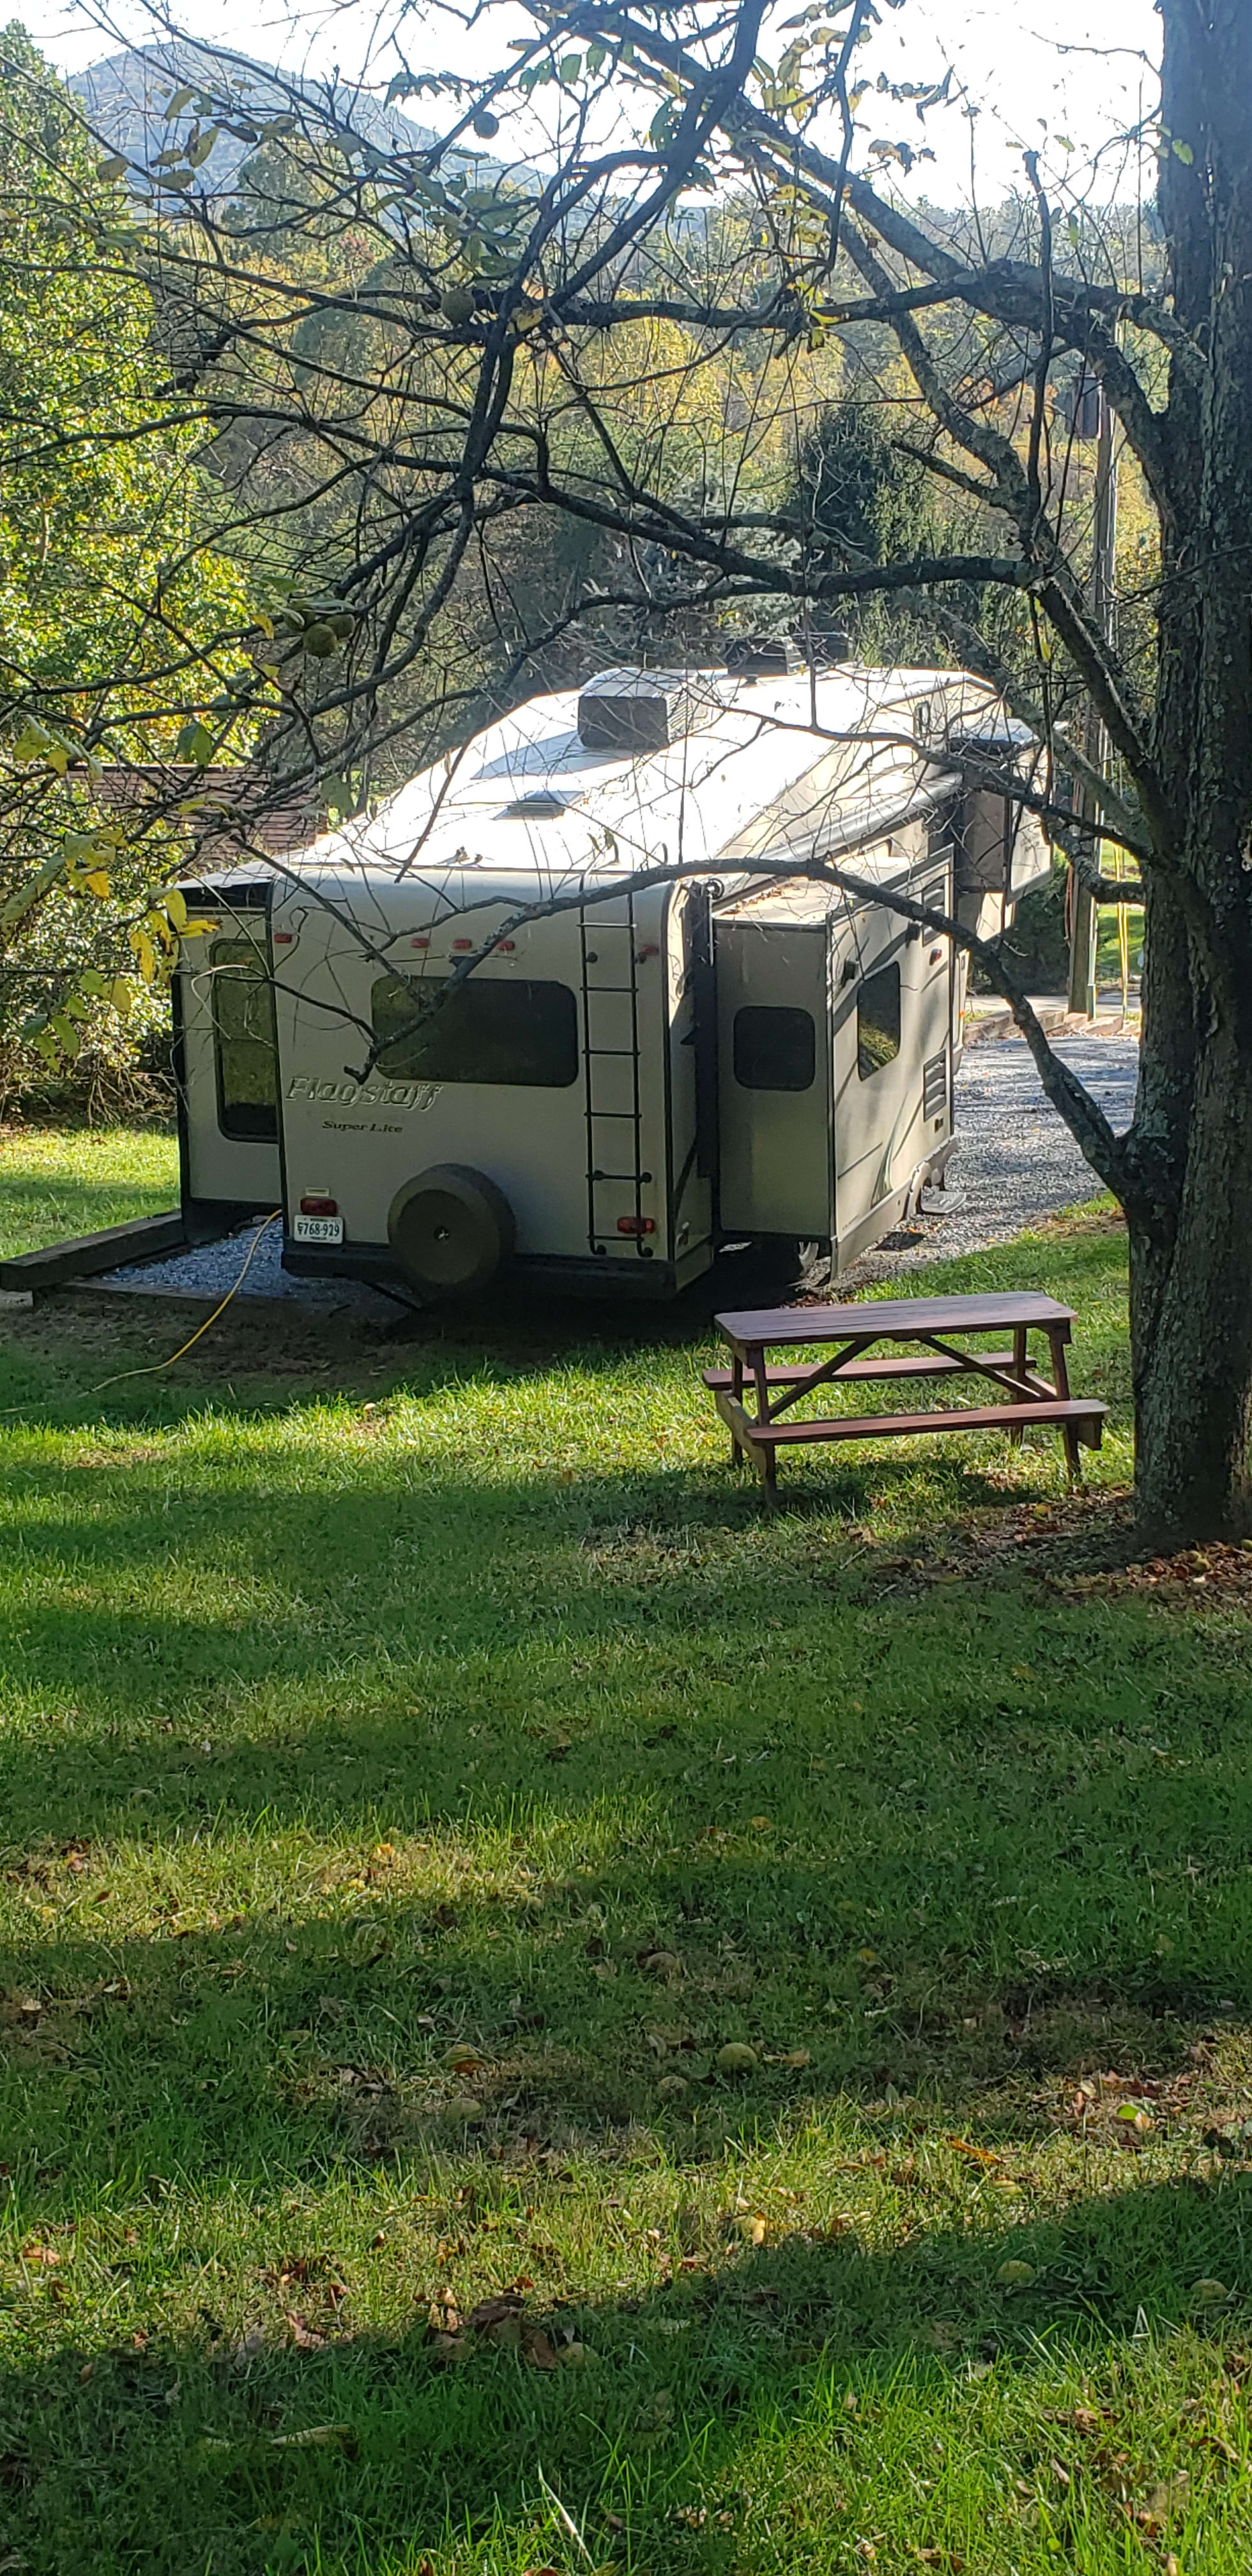 This is my rig for size comparison. 32' 5th, and the site is more spacious than most.